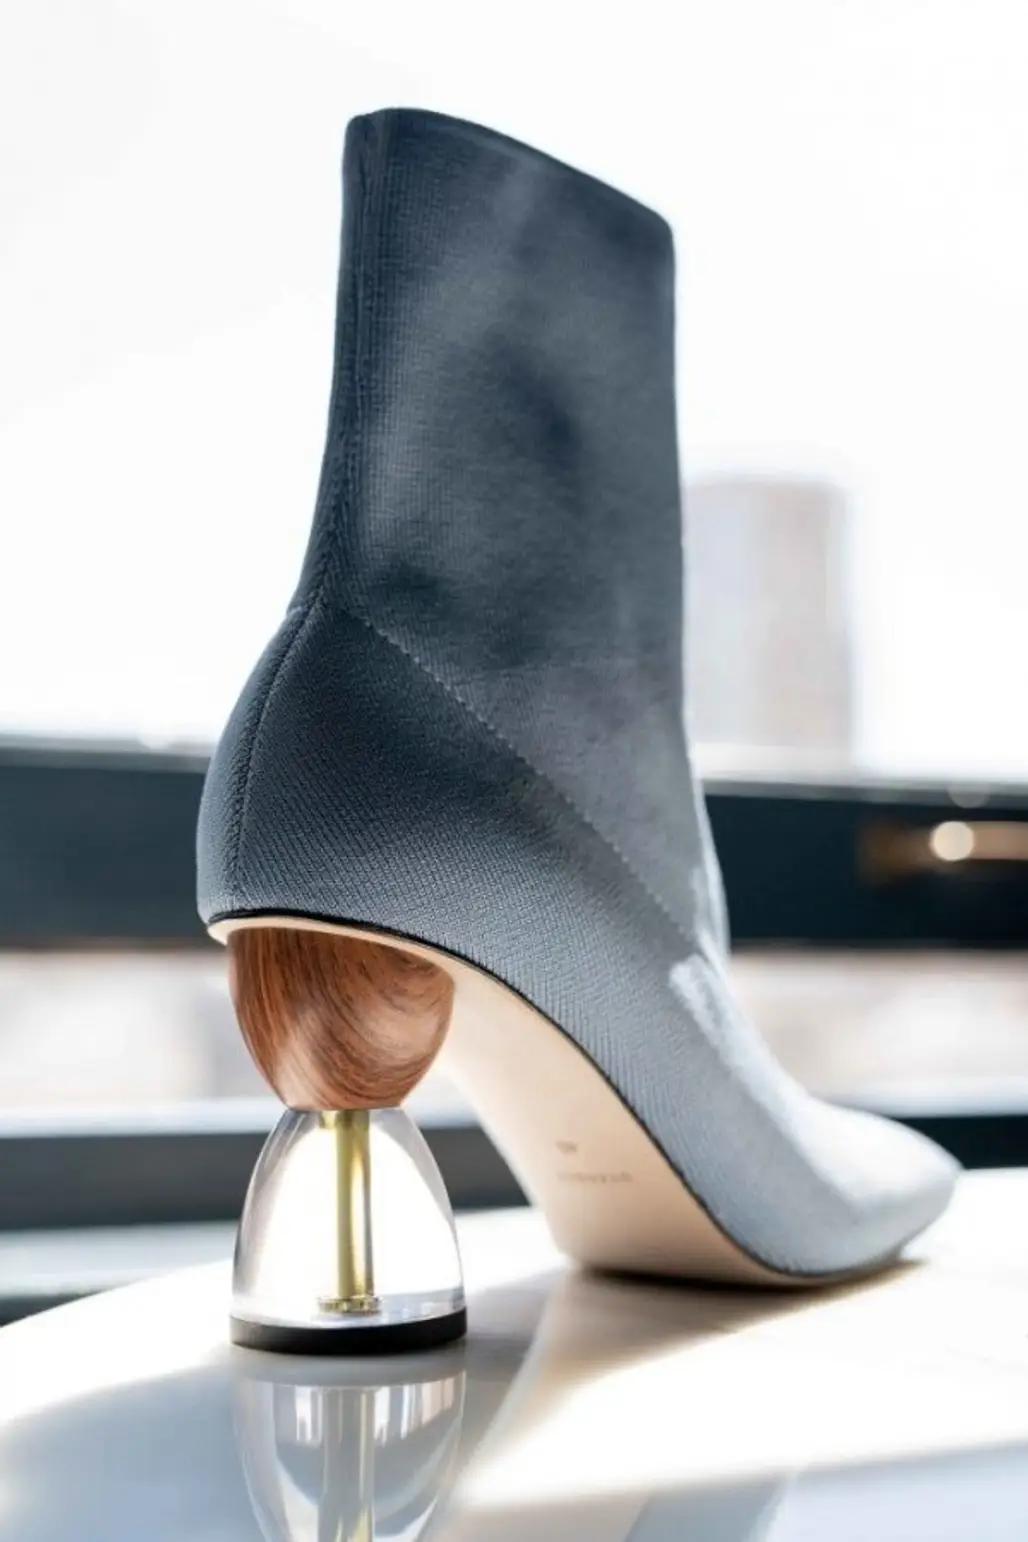 17 High Heels for Short Girls Who Don't Want to Fall down ...